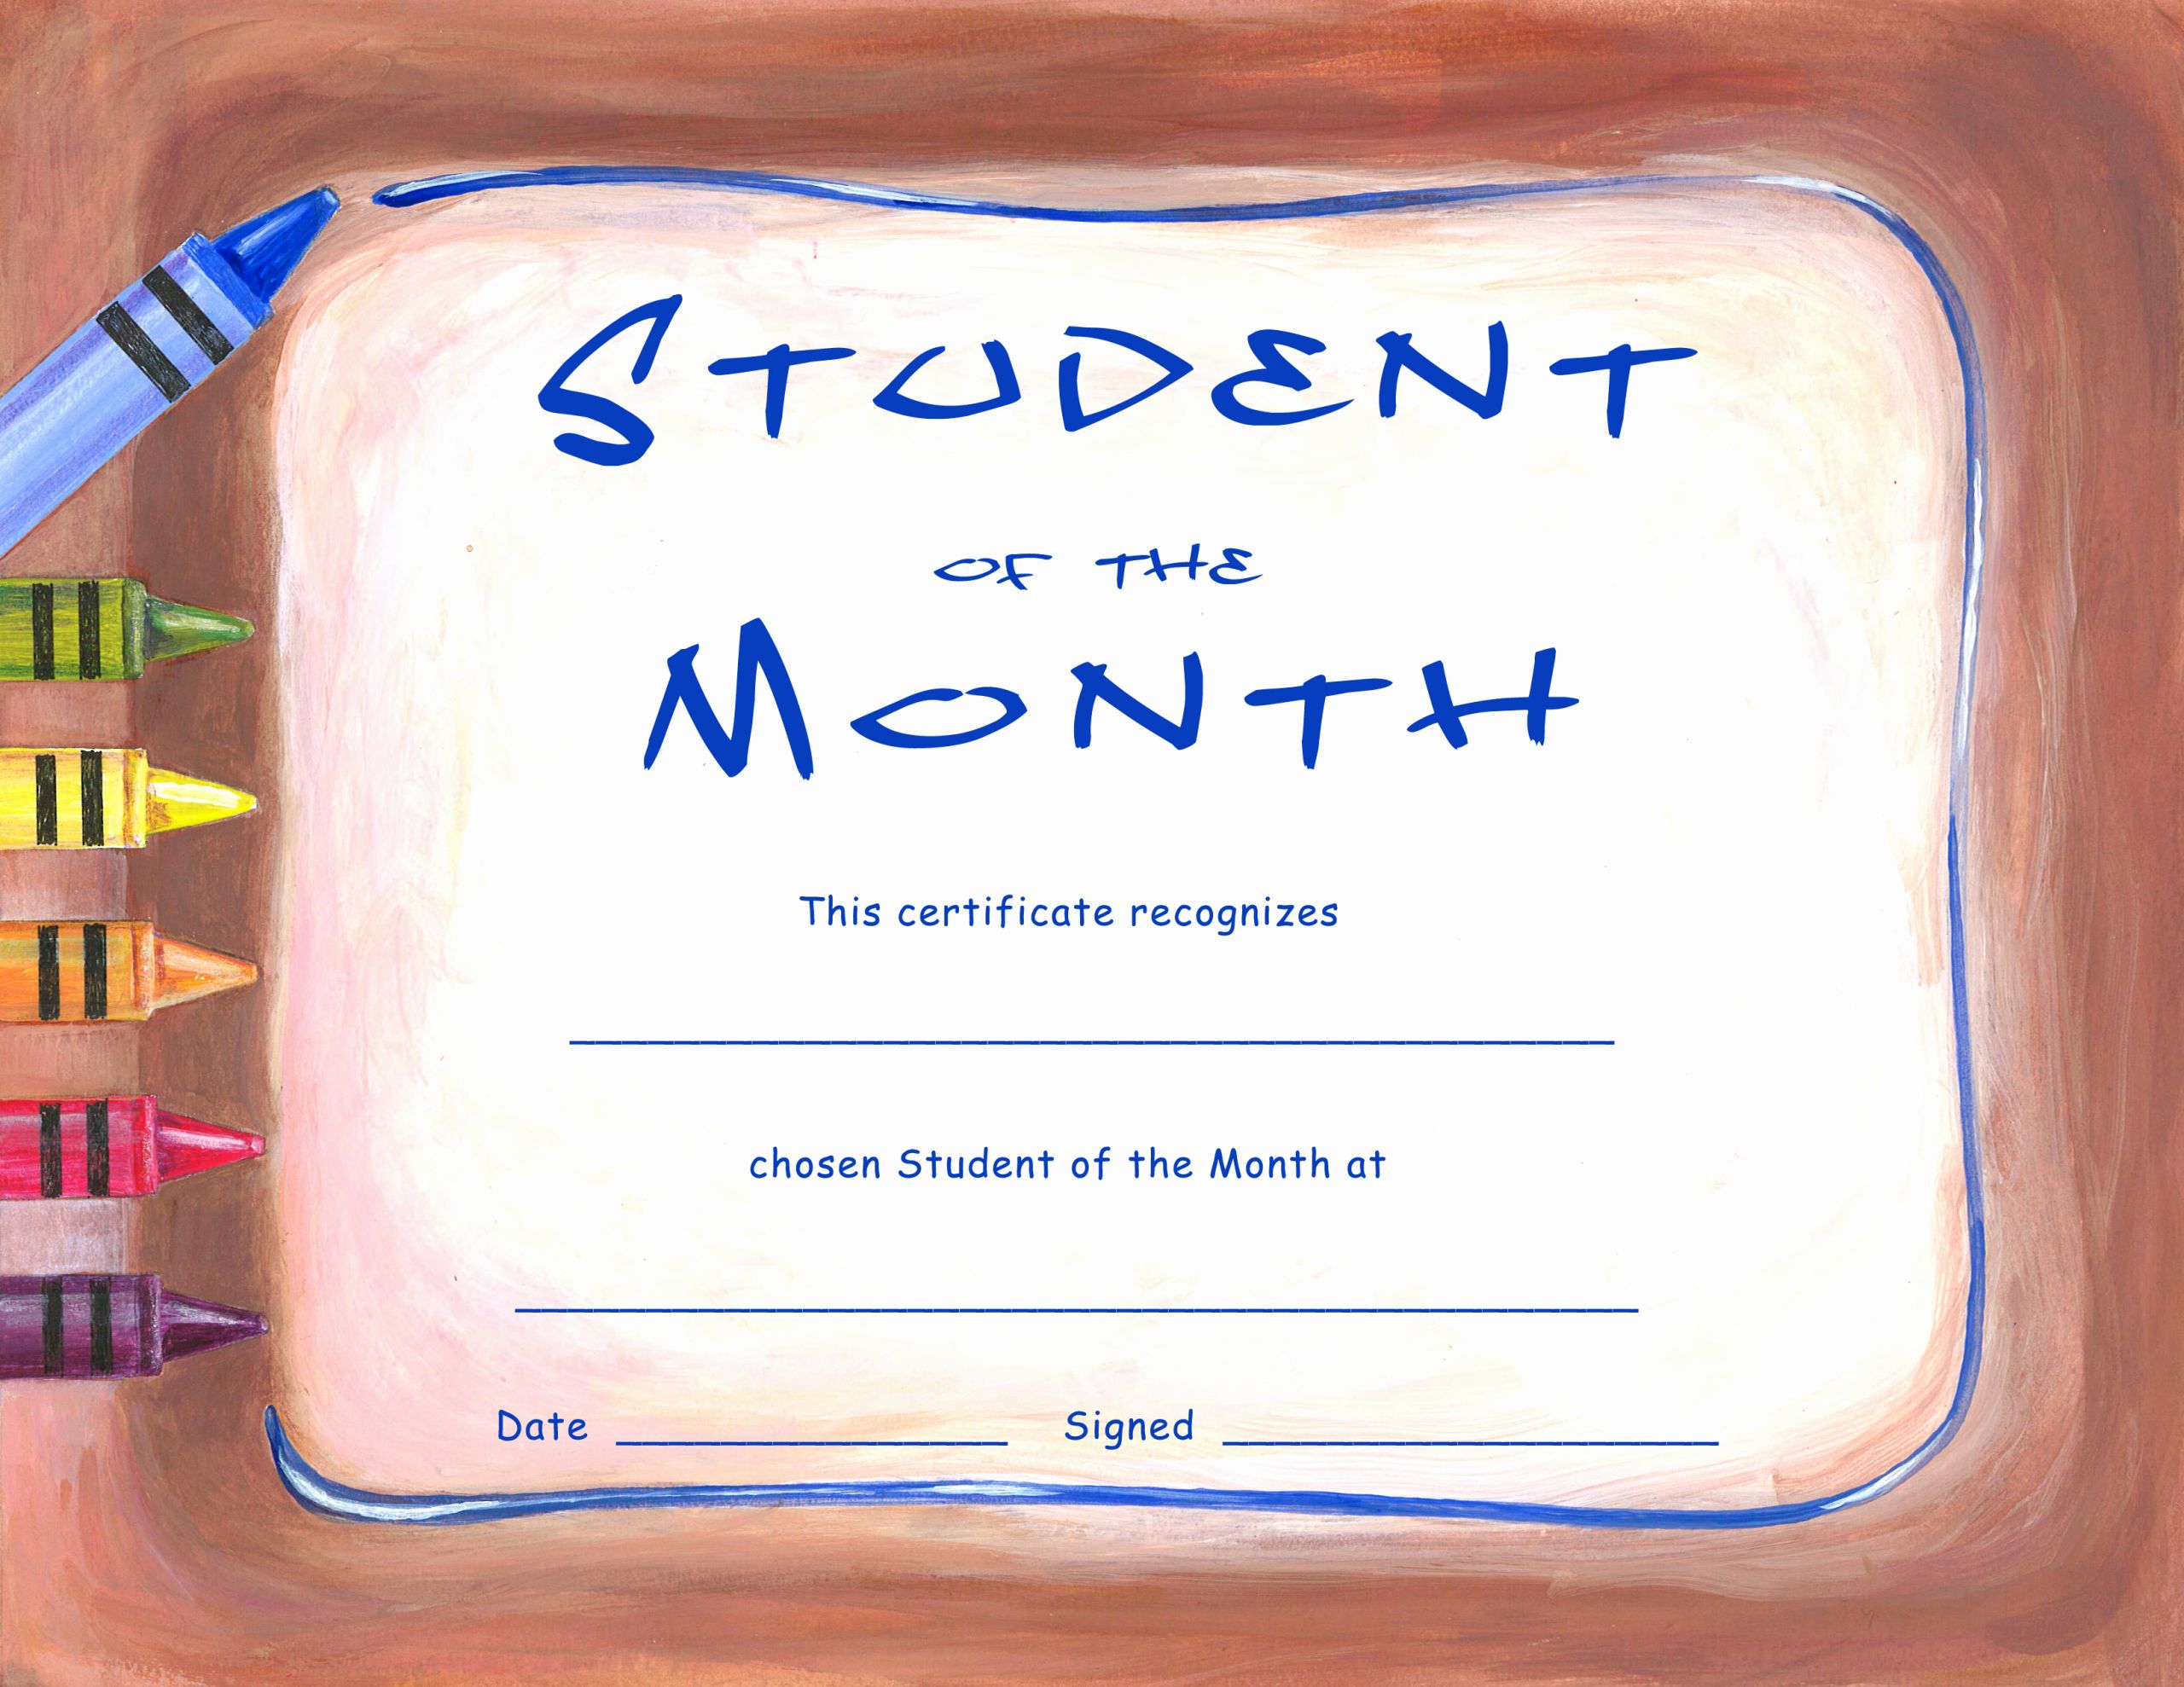 Student Of the Month Certificates Luxury Catalog Code Pap537 Pencils Student Of the Month